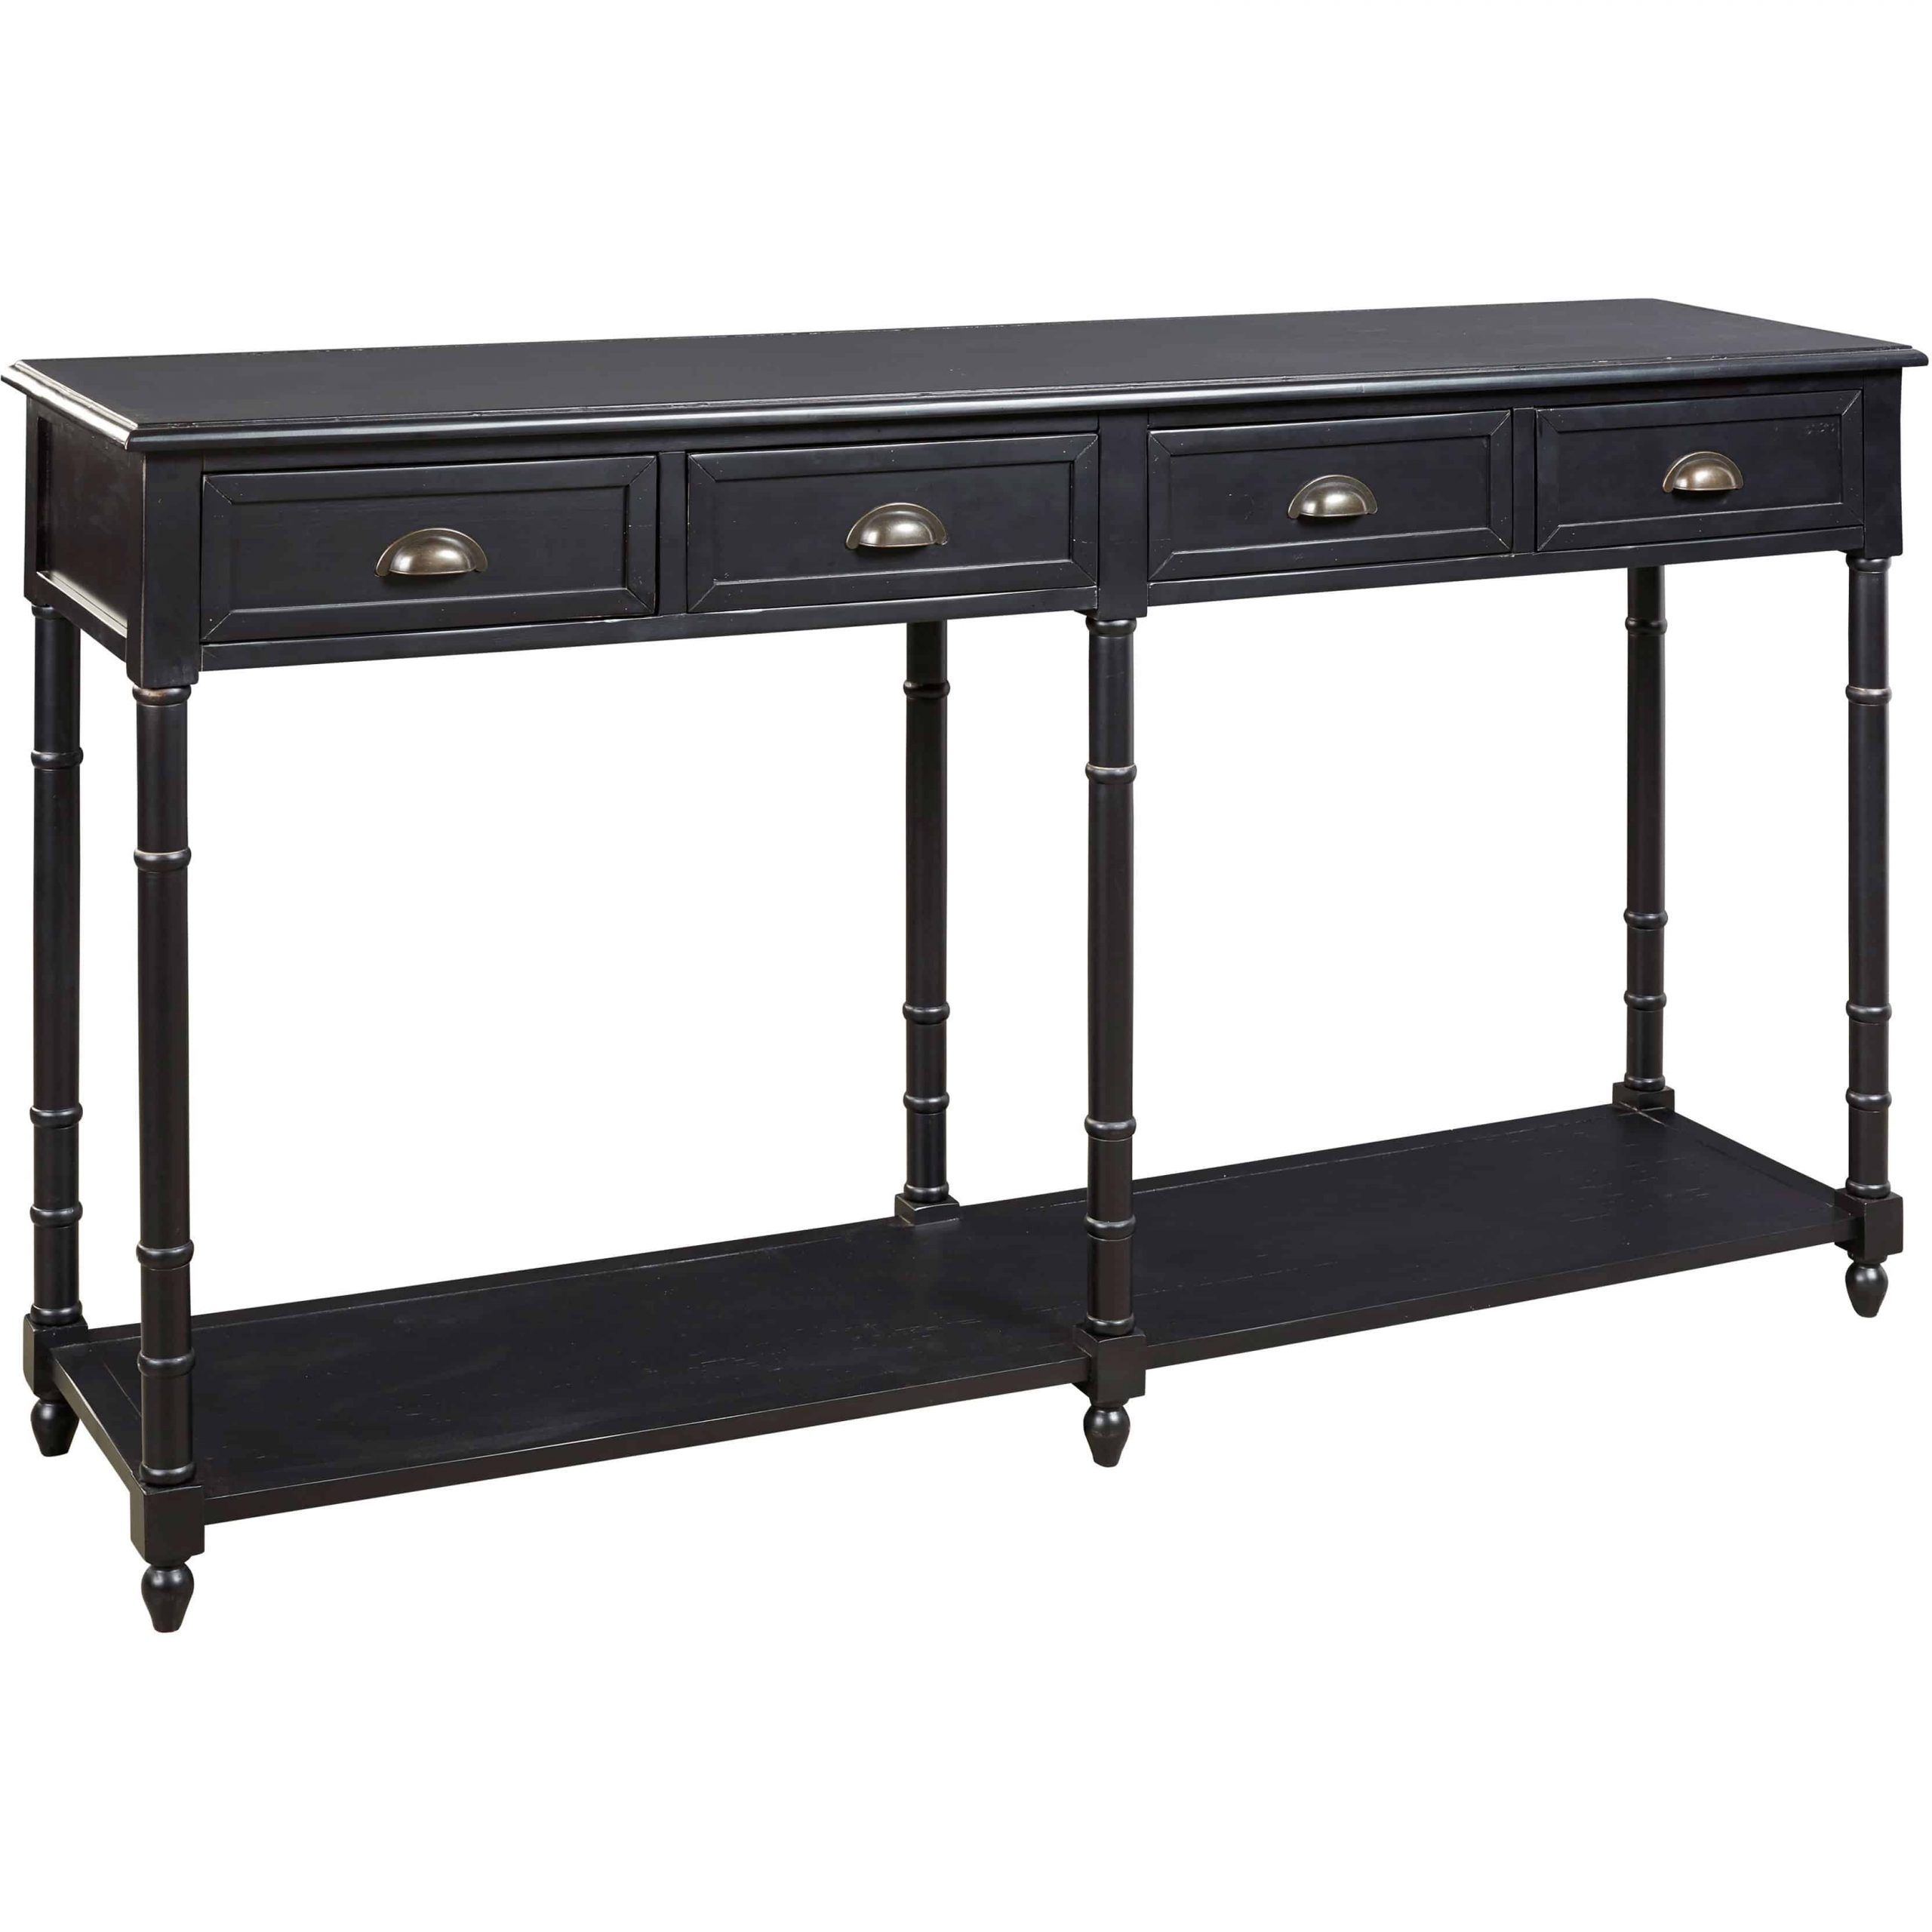 Eirdale Black Console Sofa Table | Furnishmyhome (View 13 of 20)